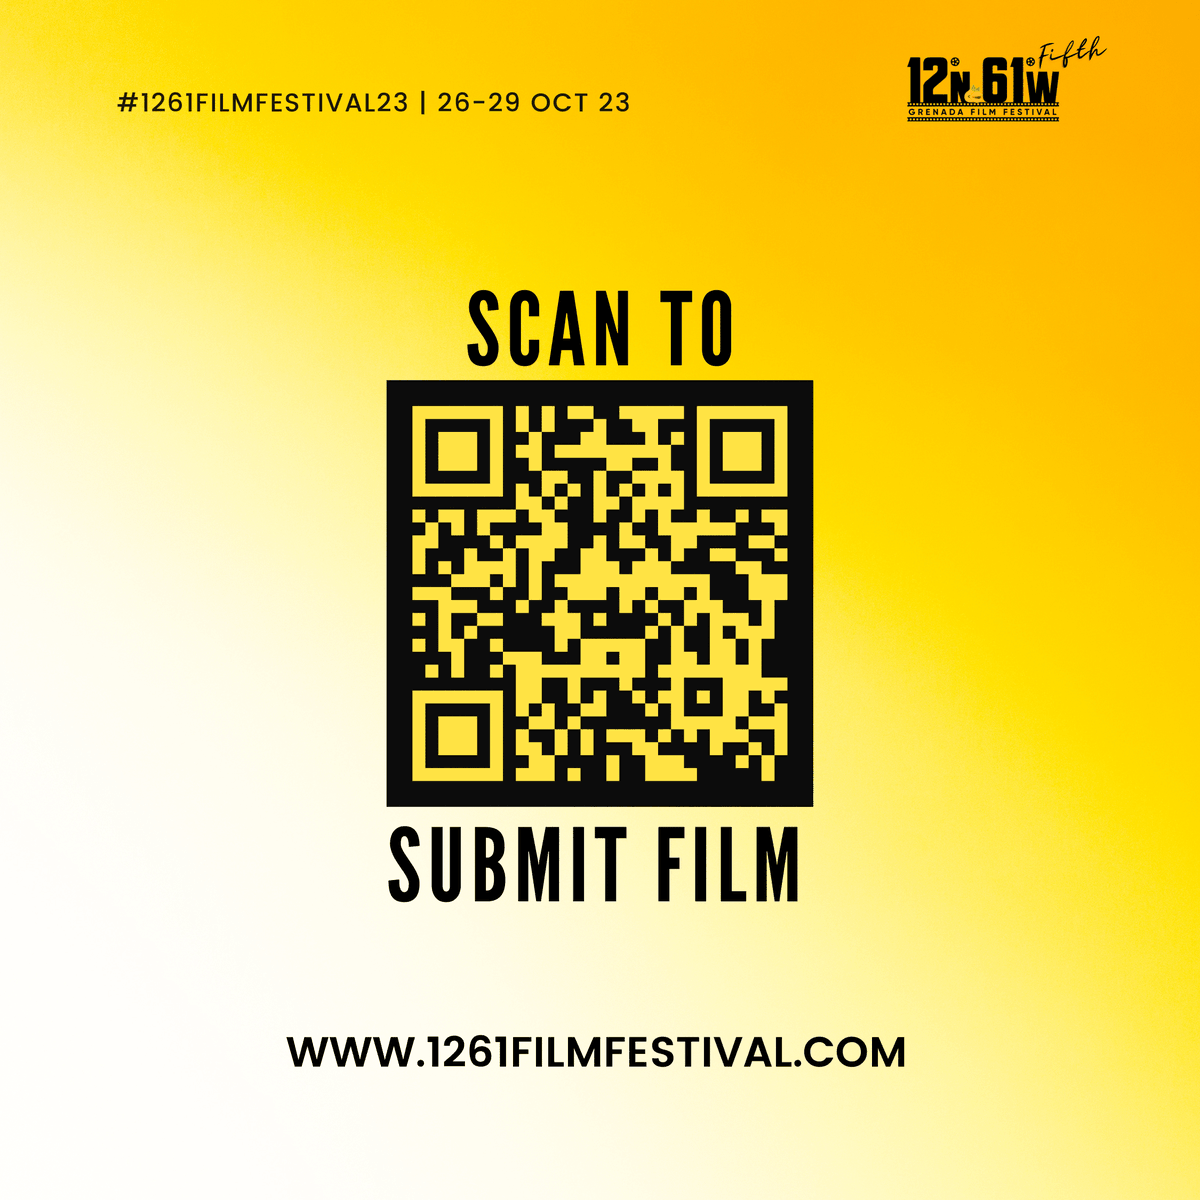 Check out @1261filmfest #opencallforfilm by filmmakers from #Grenada #Caribbean and #African diaspora by June 30th, 23. Imagine screening under the the twinkling stars on the breathtaking island in Grenada. Submit via filmfreeway.com/1261fimfestival